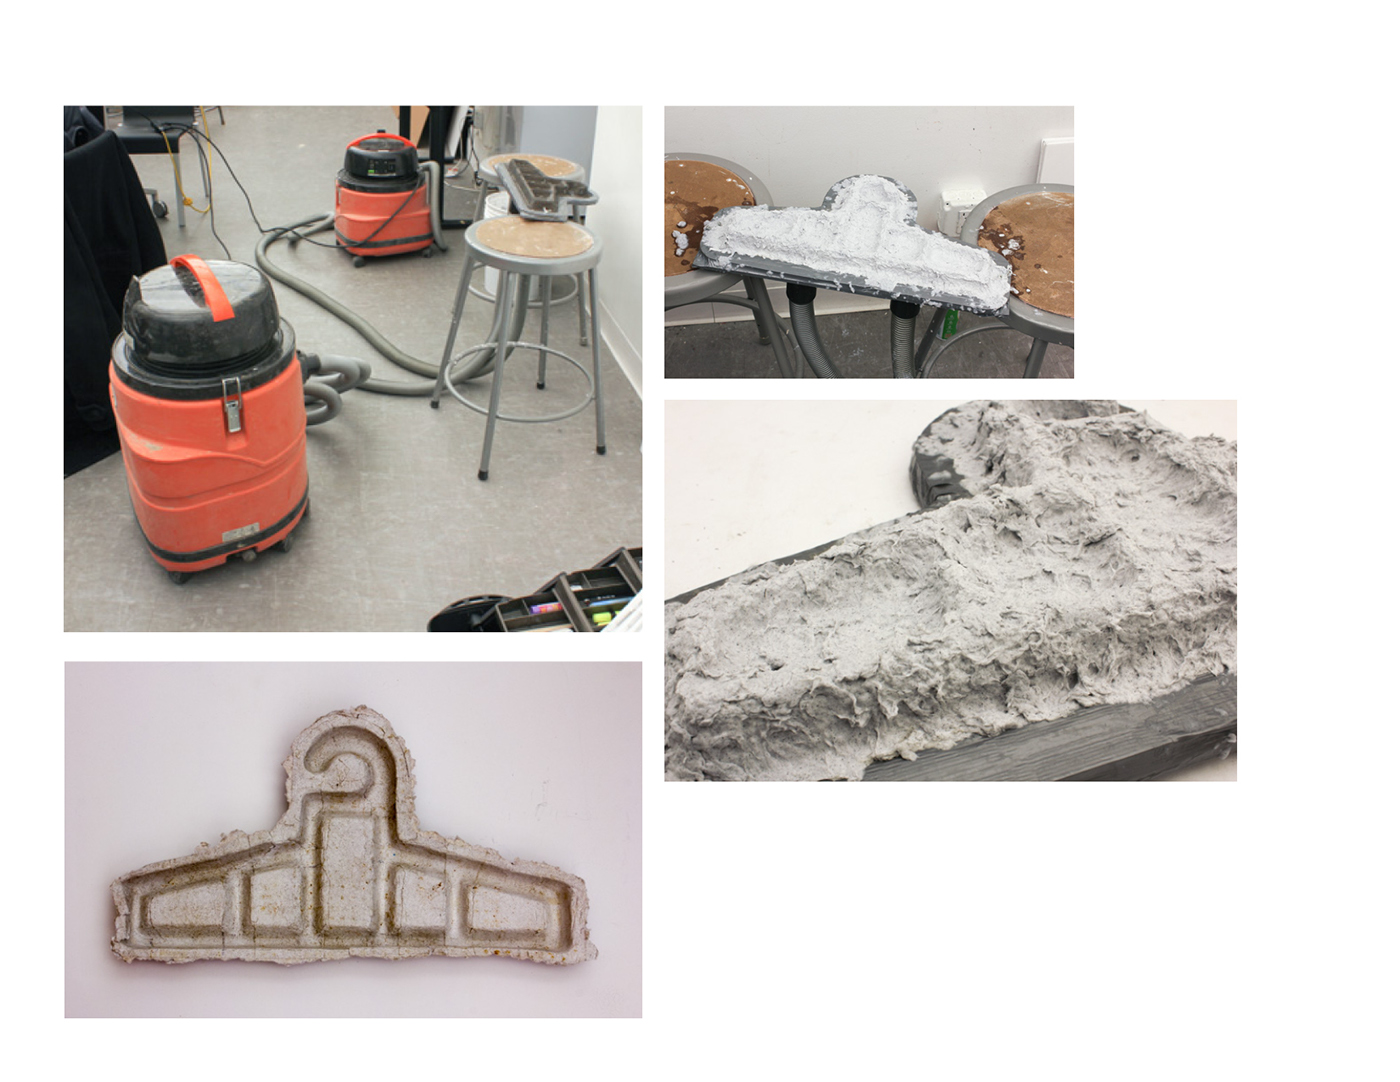 Molded paper pulp hanger Sustainable ecological manufacturing Production Prototyping ShopBot